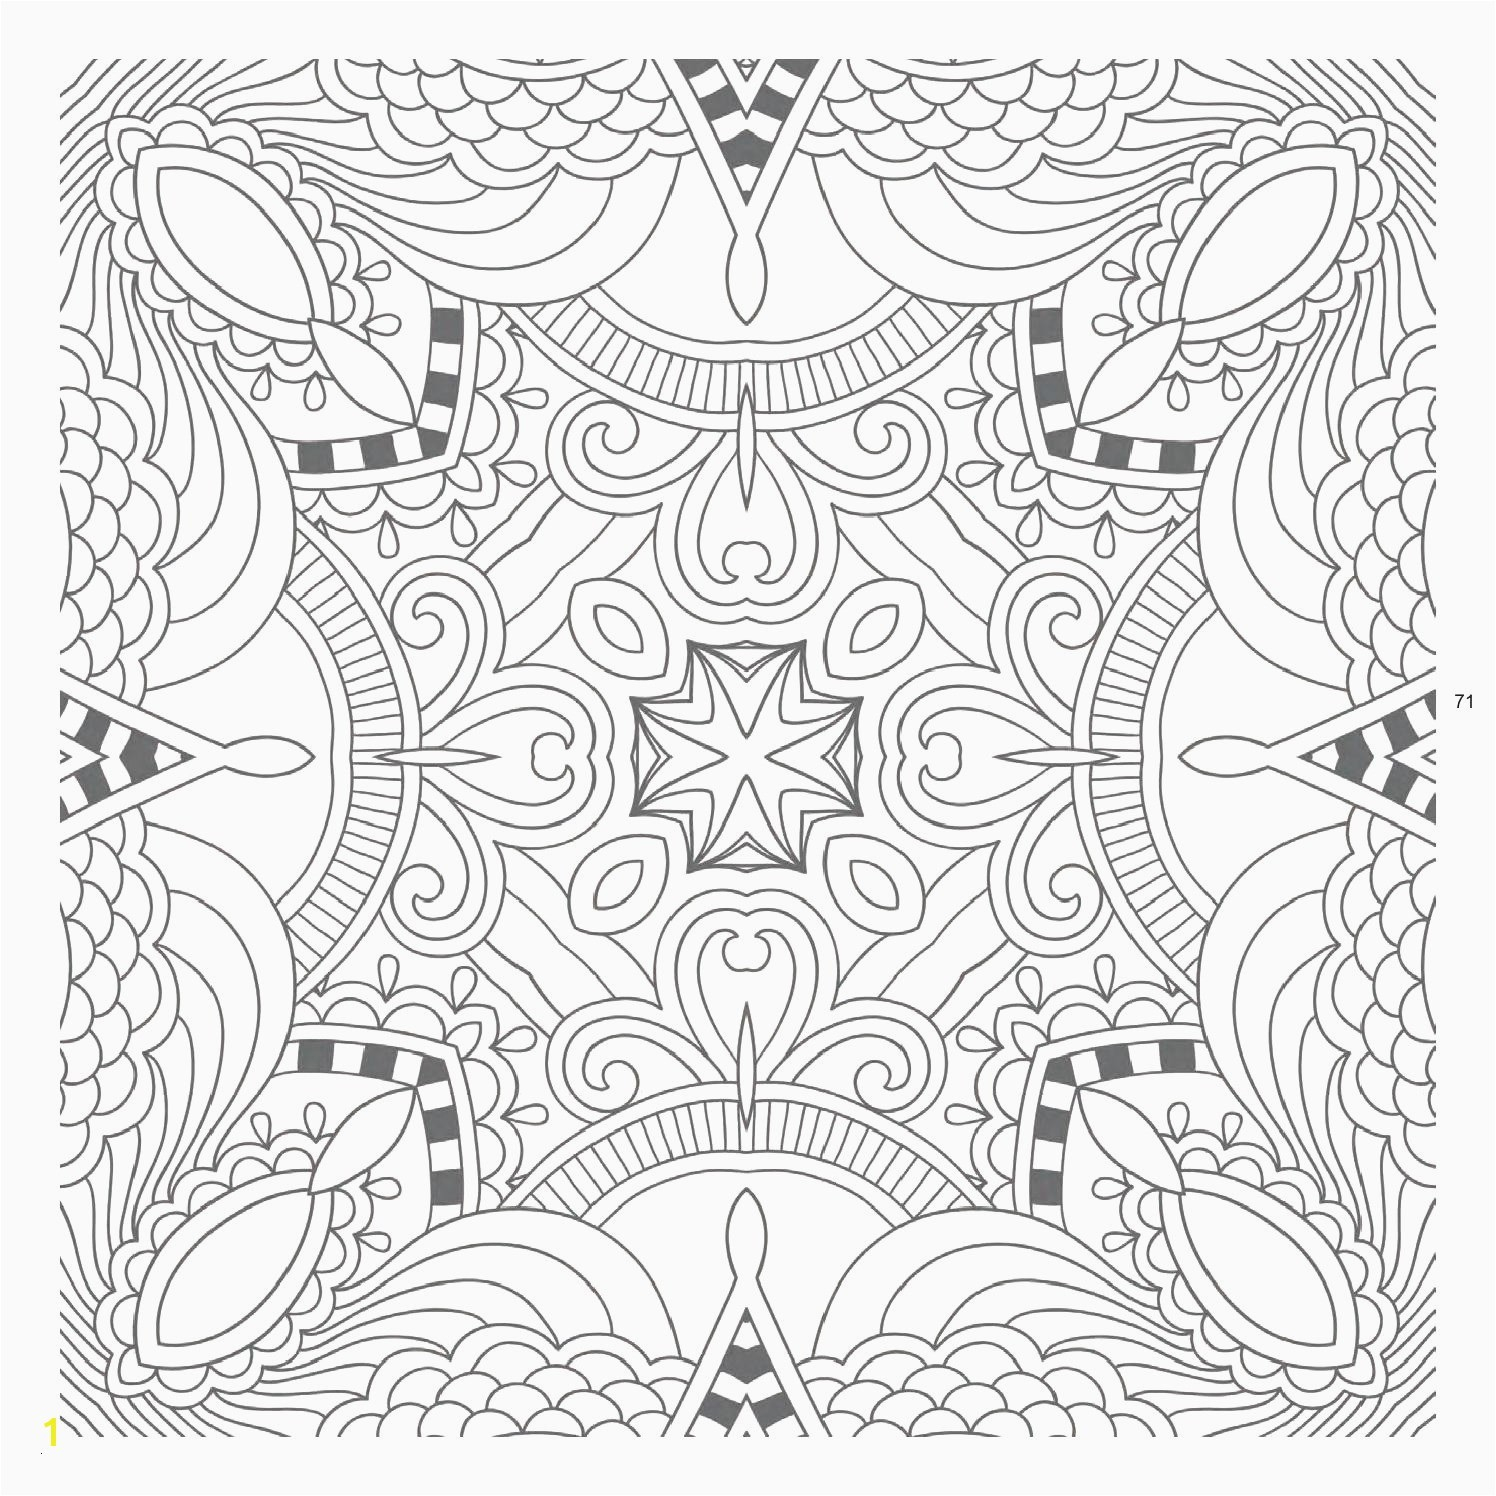 Mandala Coloring Pages For Adults Coloring Sheets Mandala Coloring Online Free Sheets Pages